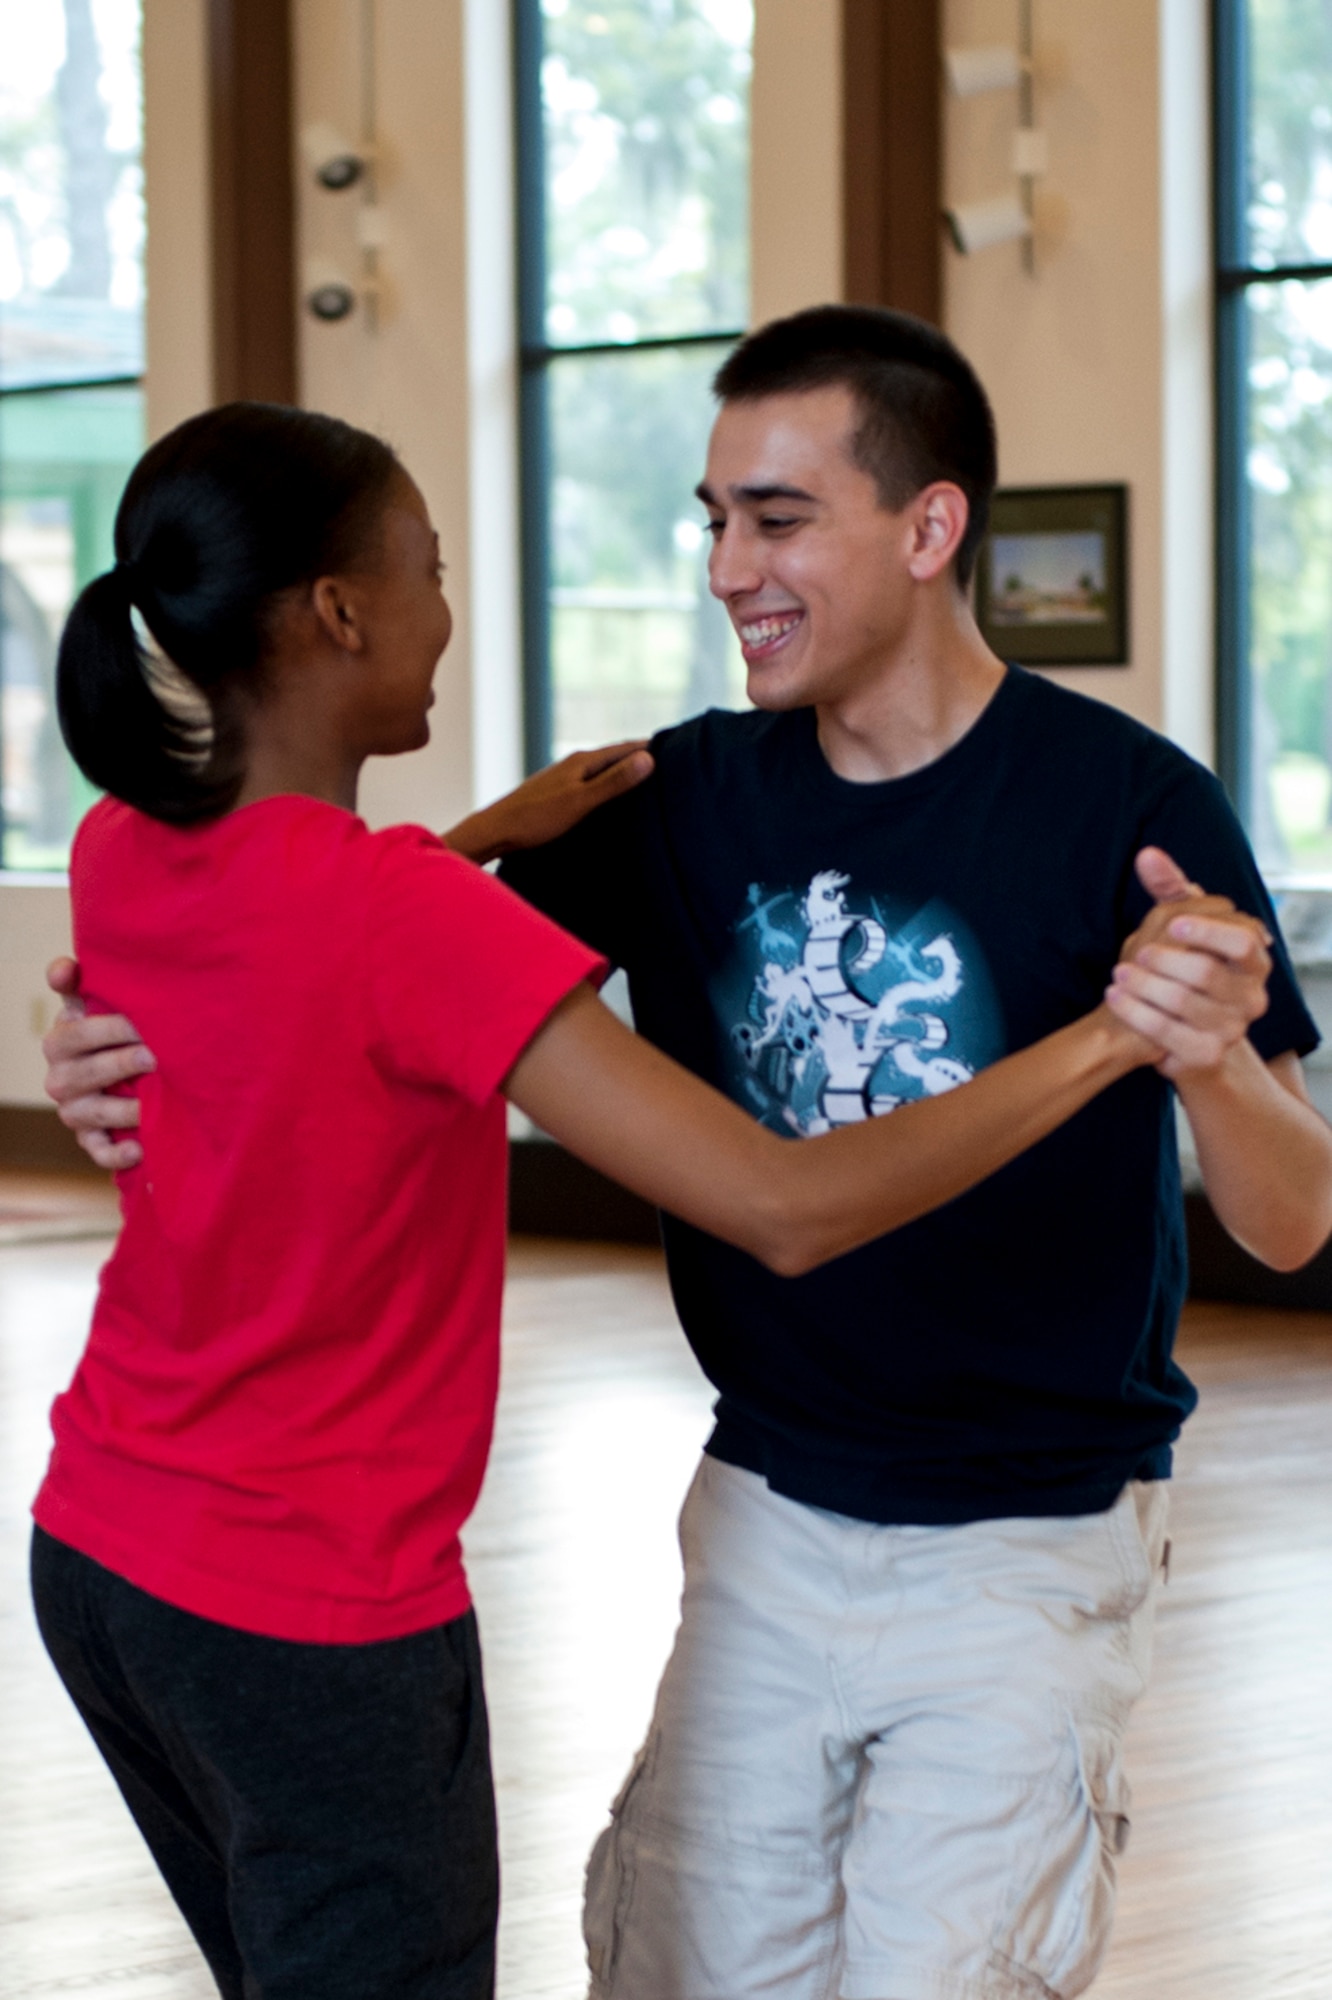 U.S. Air Force 2nd Lt. Simon Pena, 23d Force Support Squadron lodging officer, teaches Senior Airman Candice Bates, 23d Aerospace Medicine Squadron dental assistant, proper techniques during a ballroom dance class, March 24, 2016, at Moody Air Force Base, Ga. Pena uses his experience in nearly 20 different styles of dance to teach Moody Airmen and their families. (U.S. Air Force photo by Airman 1st Class Lauren M. Johnson/Released)